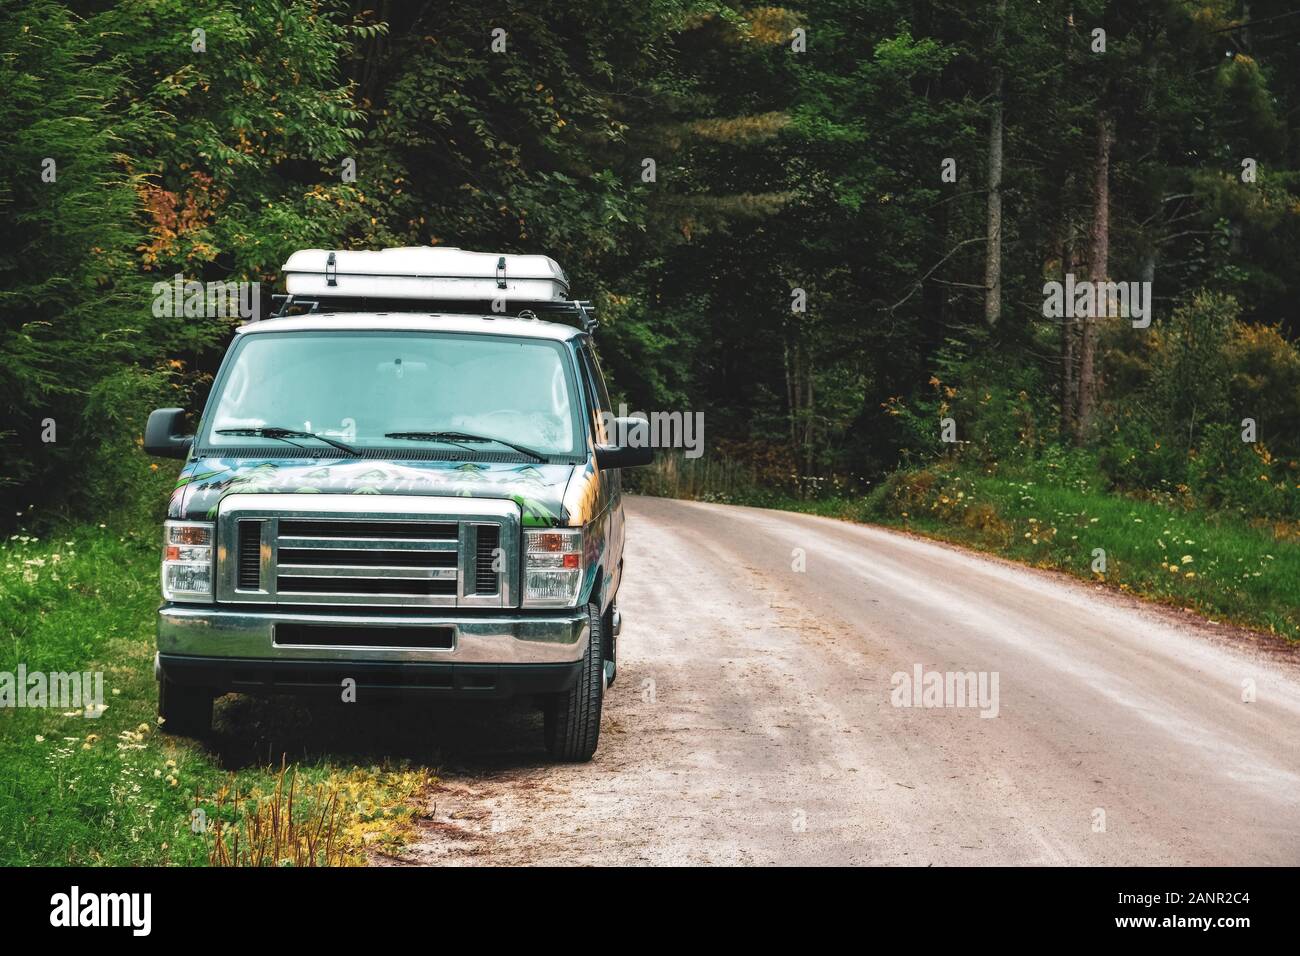 Van lifestyle concept. Van park in a path surrounded by trees in the forest in Canada. Stock Photo